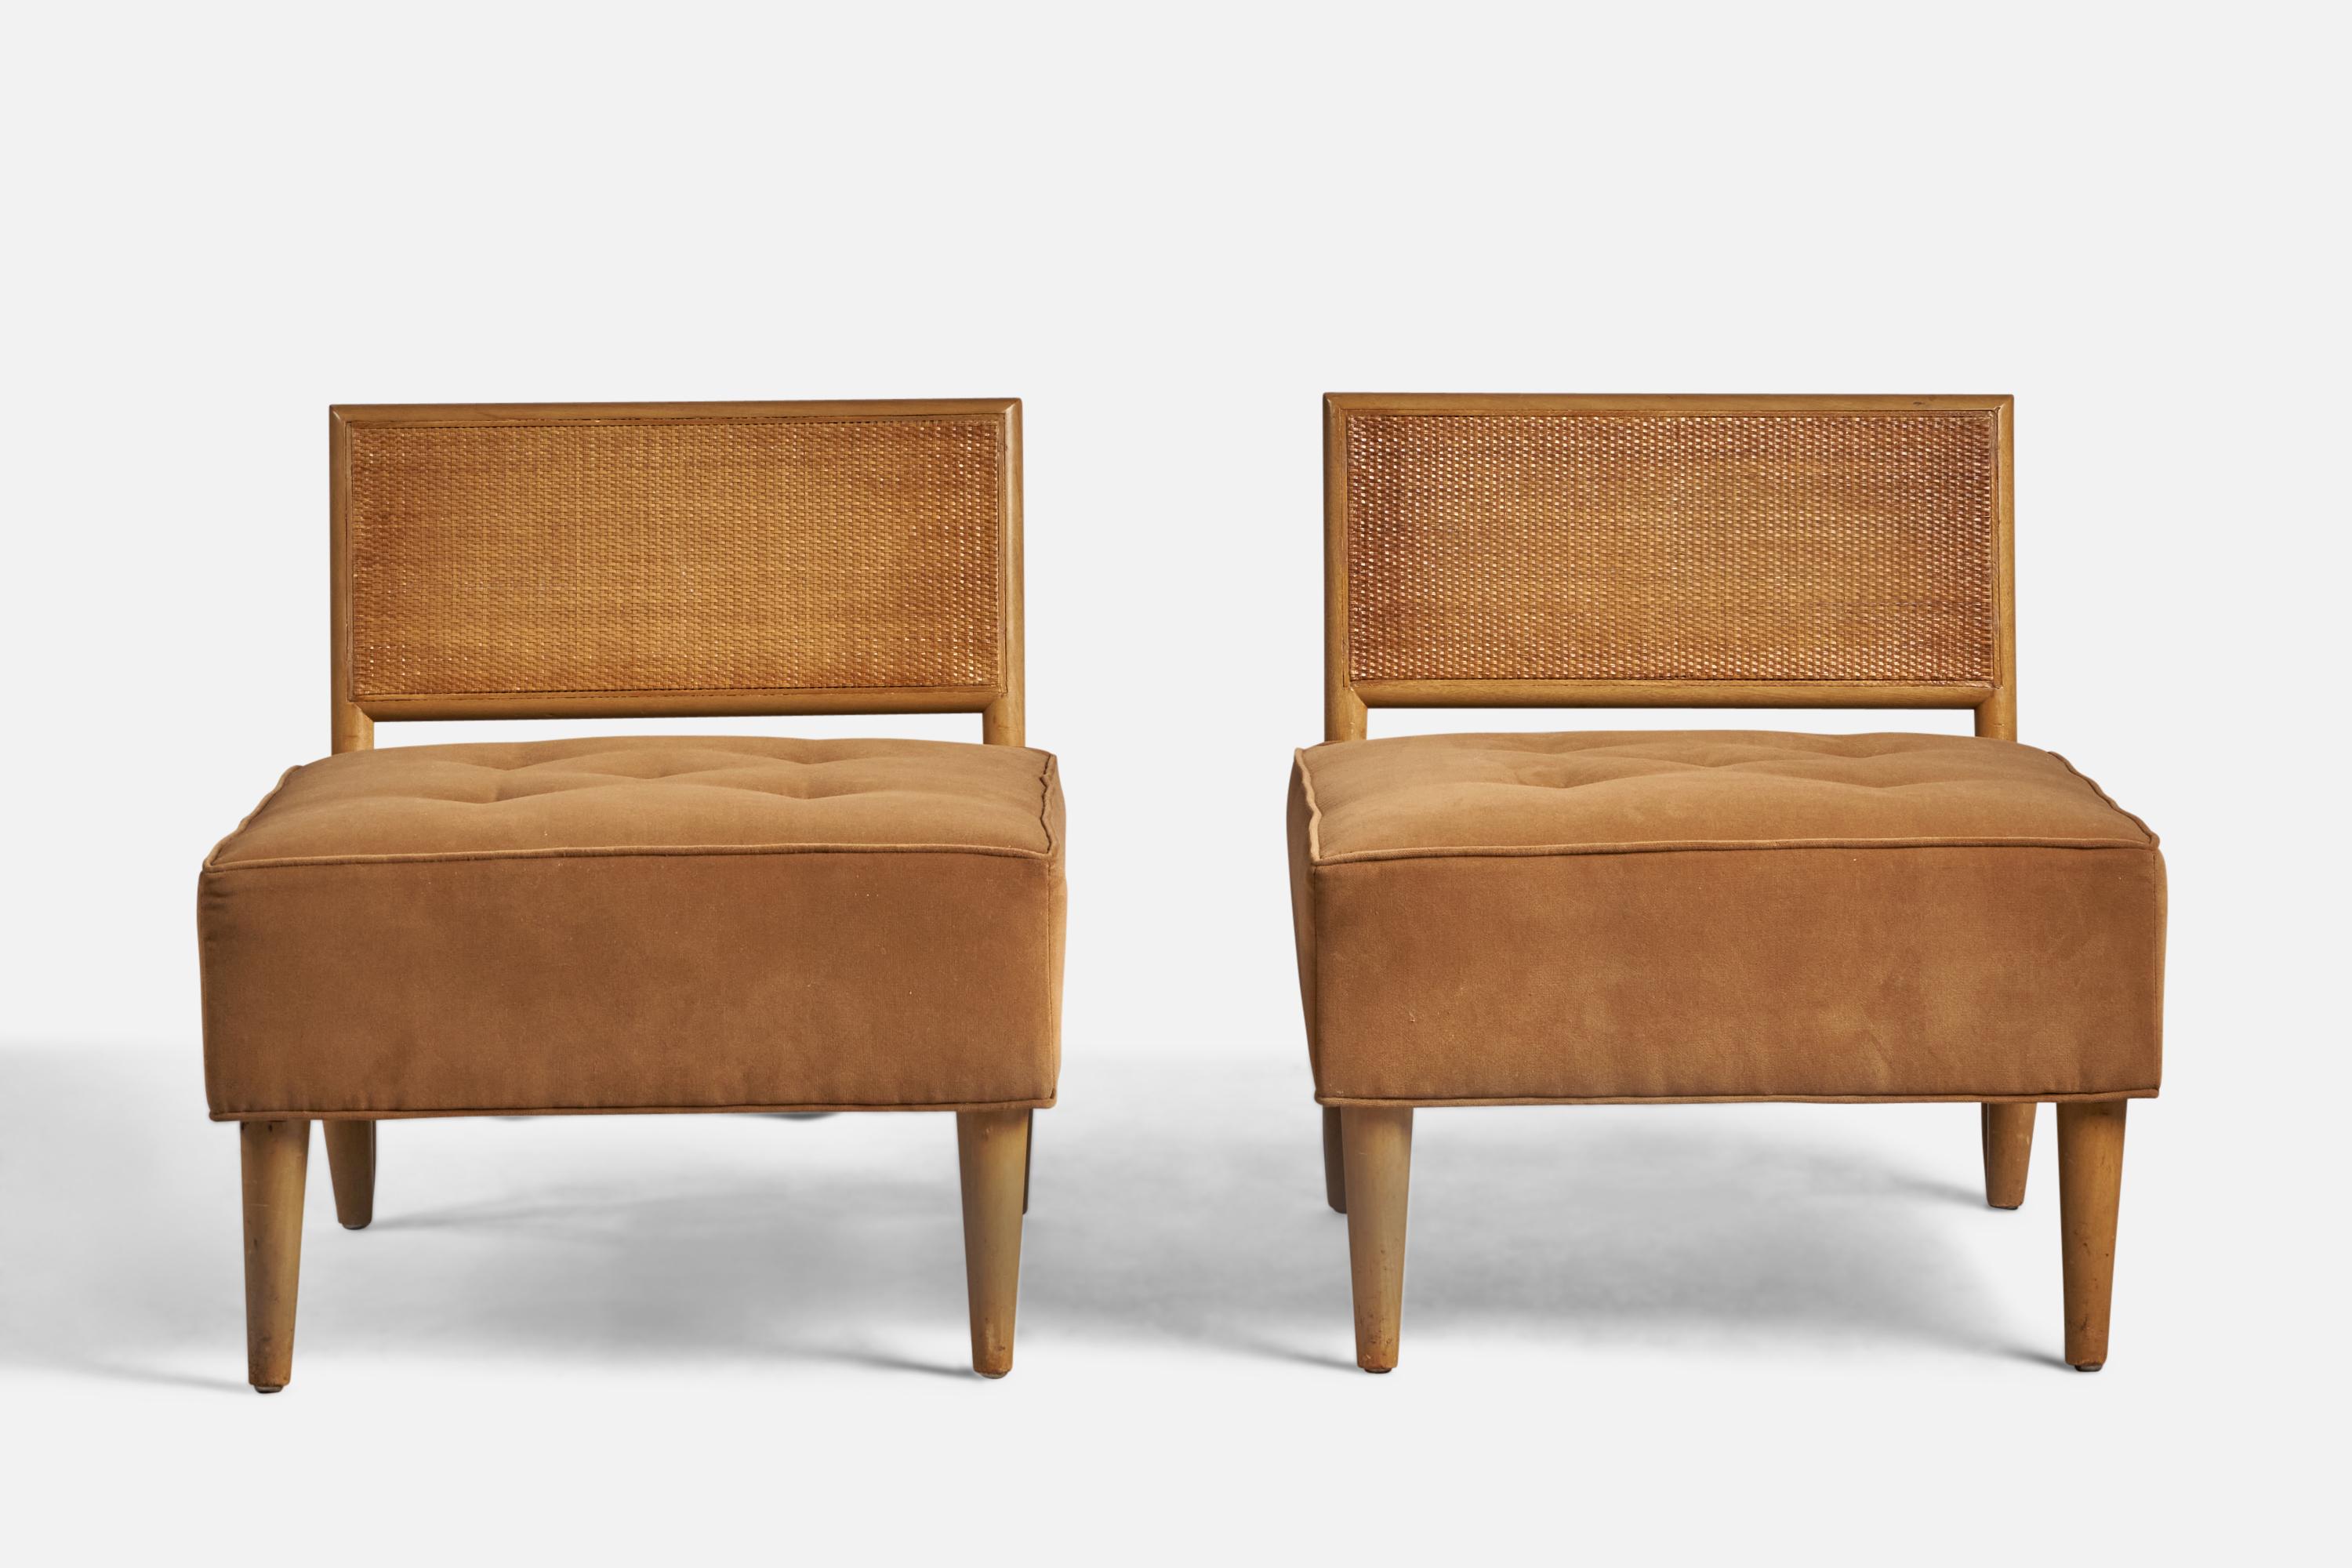 Mid-20th Century American Designer, Slipper Chairs, Wood, Rattan, Fabric, USA, 1940s For Sale